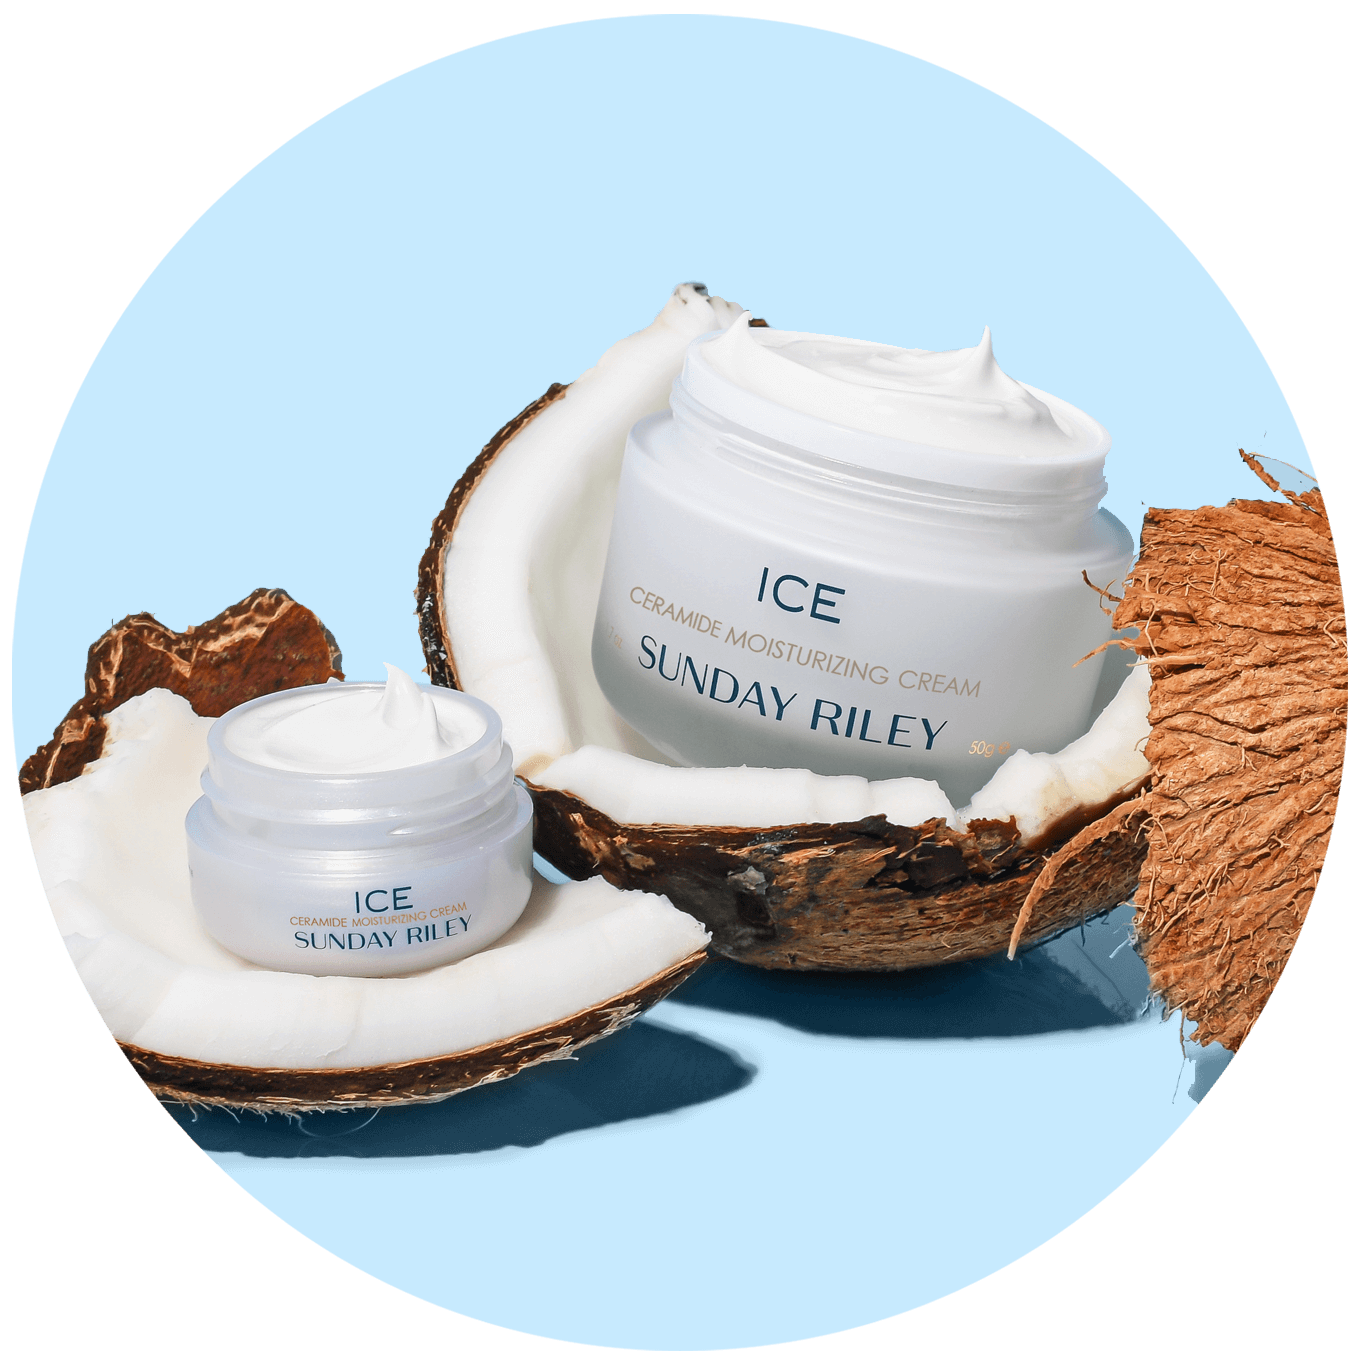 ice ceramide moisturizing cream bottle on blue background with coconut pieces on the side